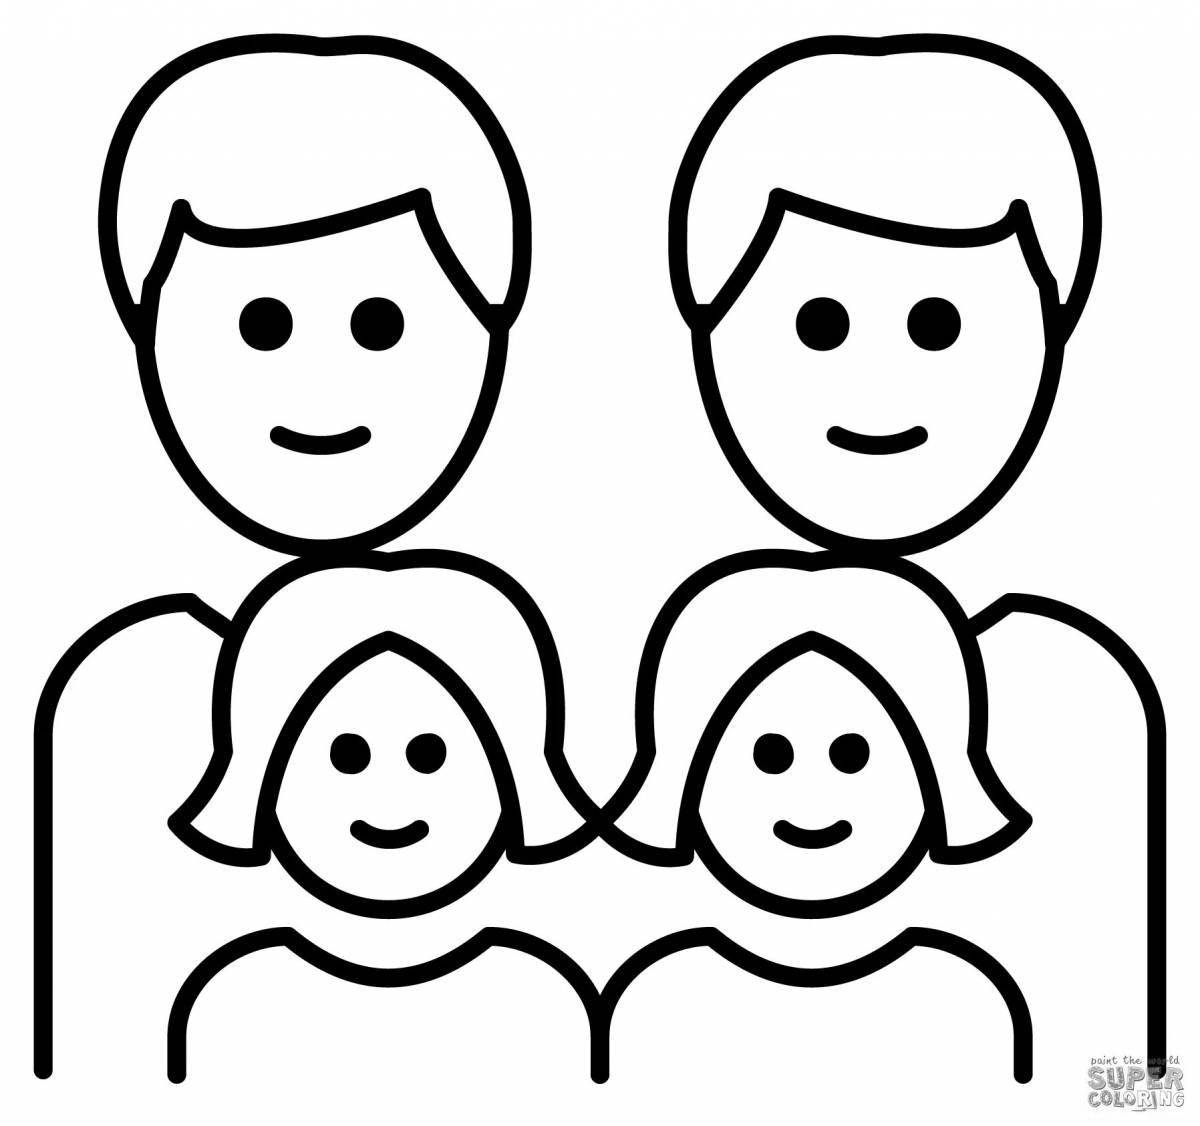 Creative family of 5 coloring pages